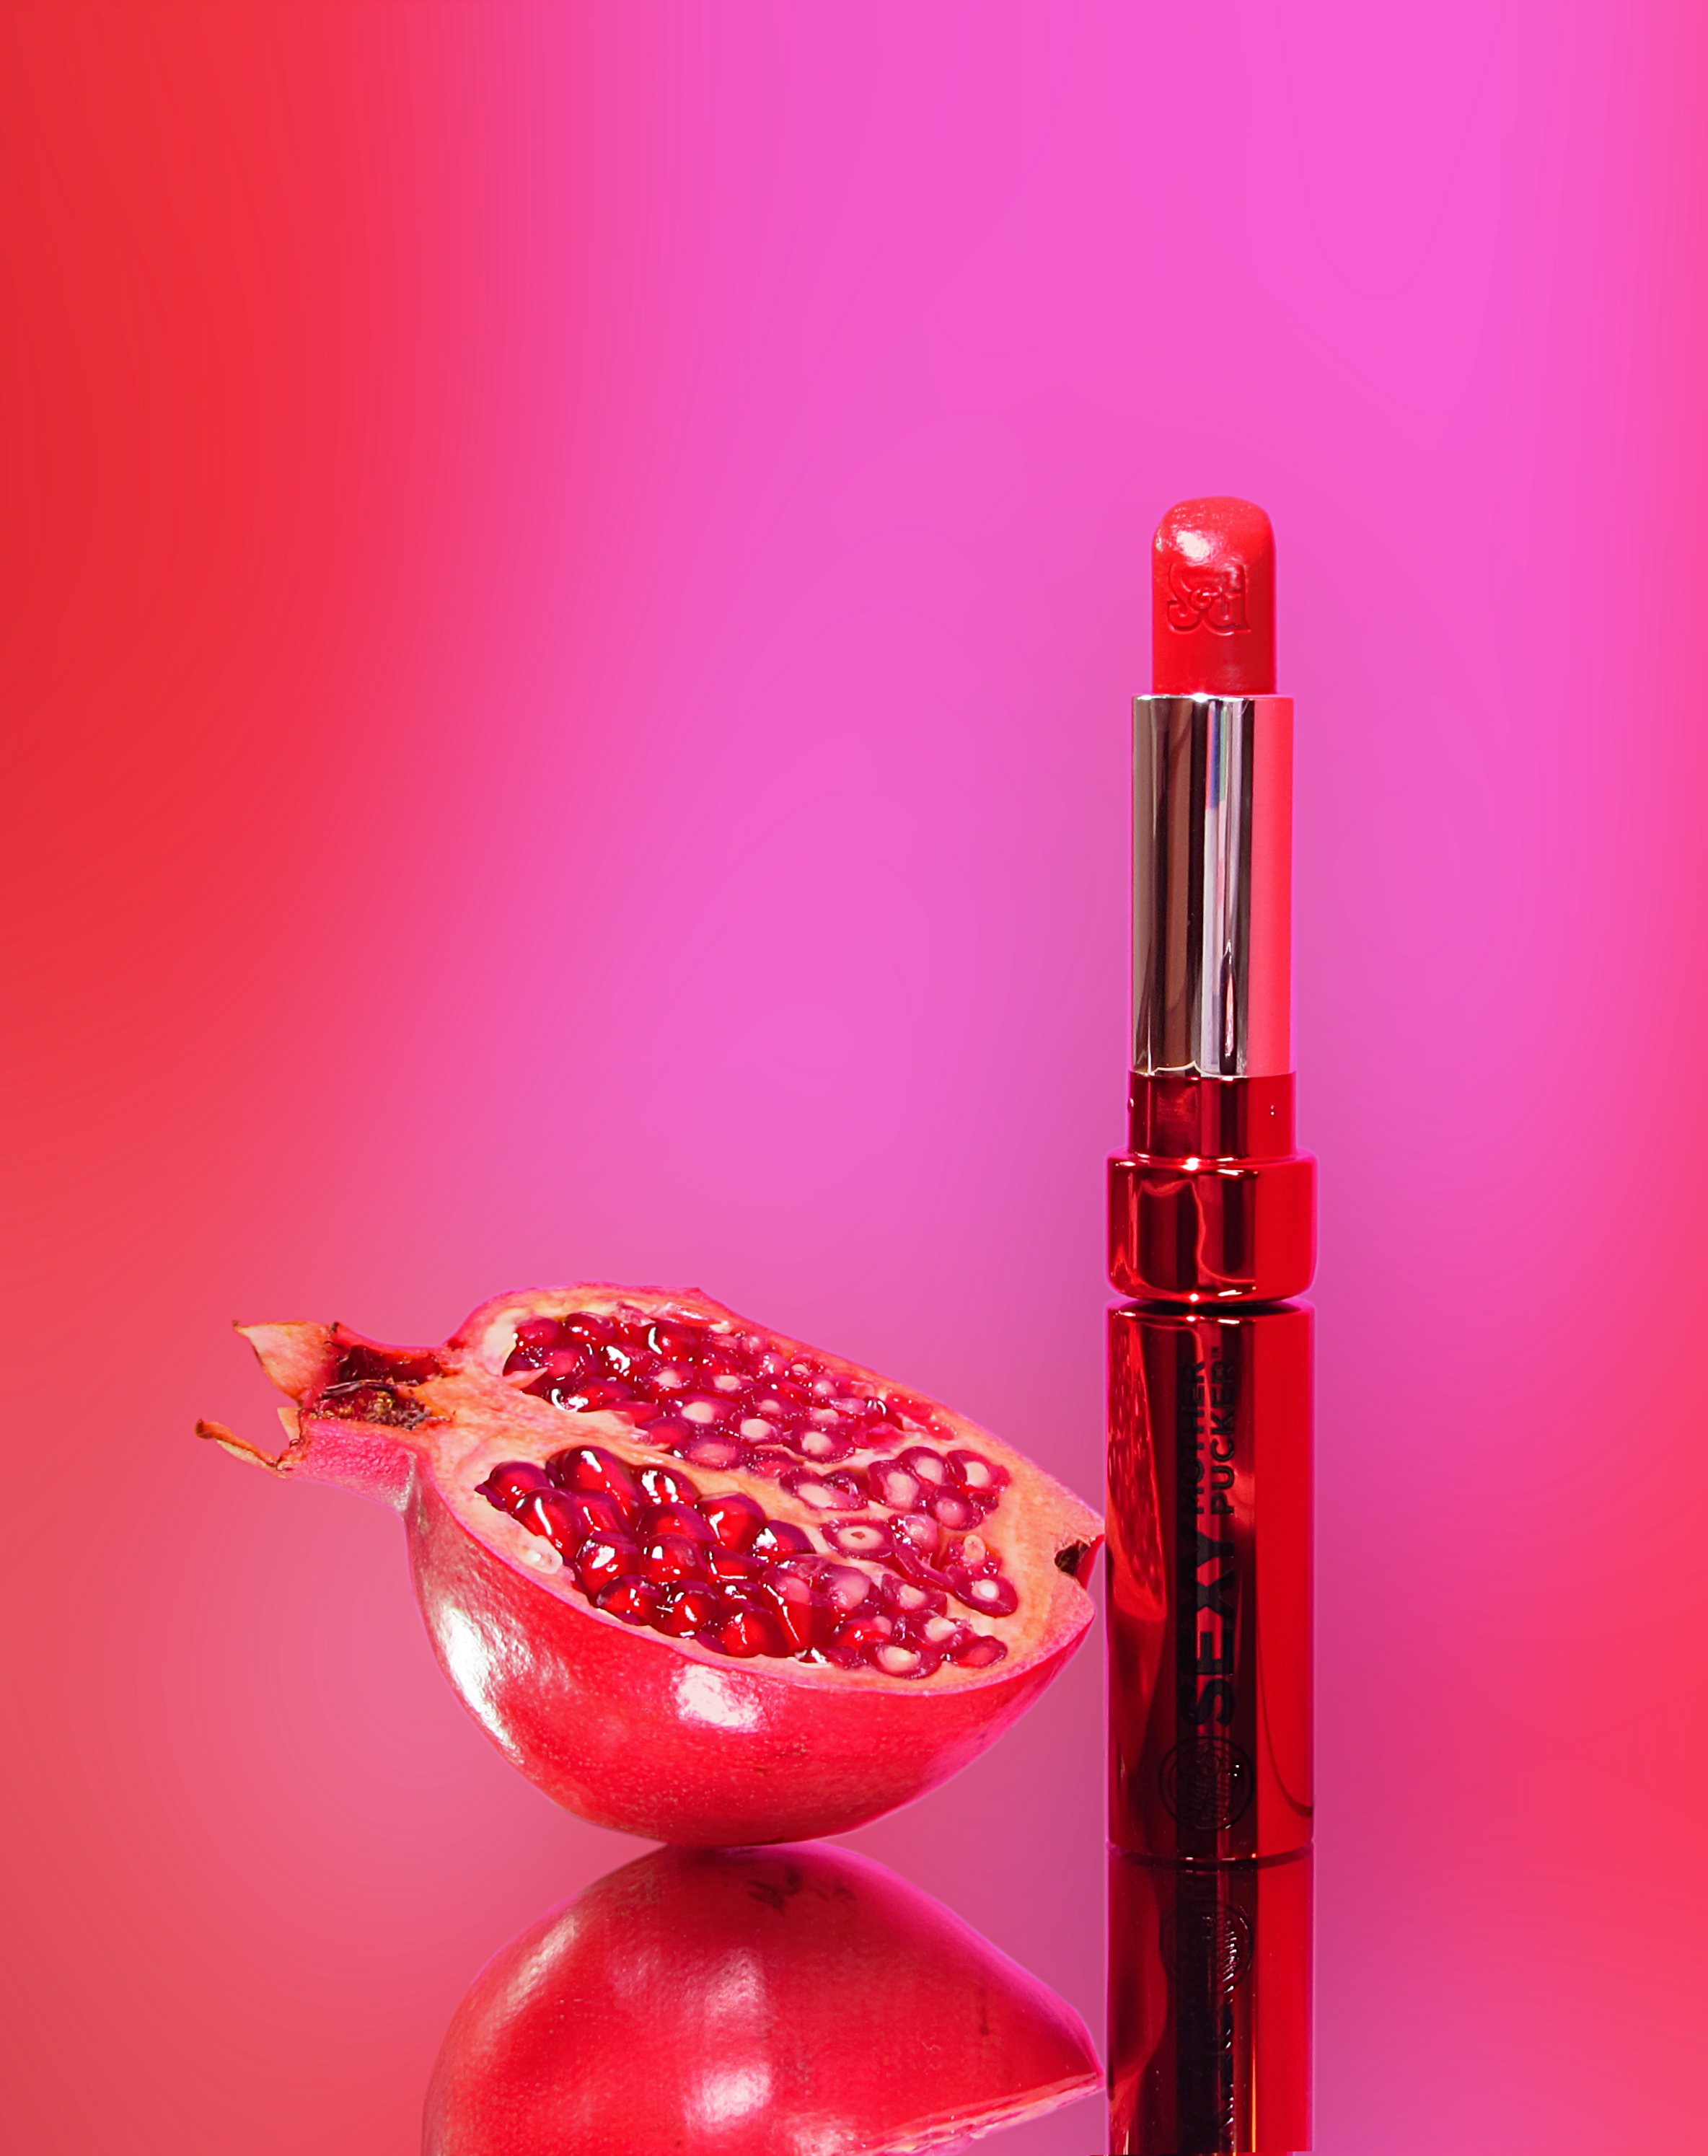 Soap & Glory Sexy Mother Pucker in Poppy Power next to a pomegranate.